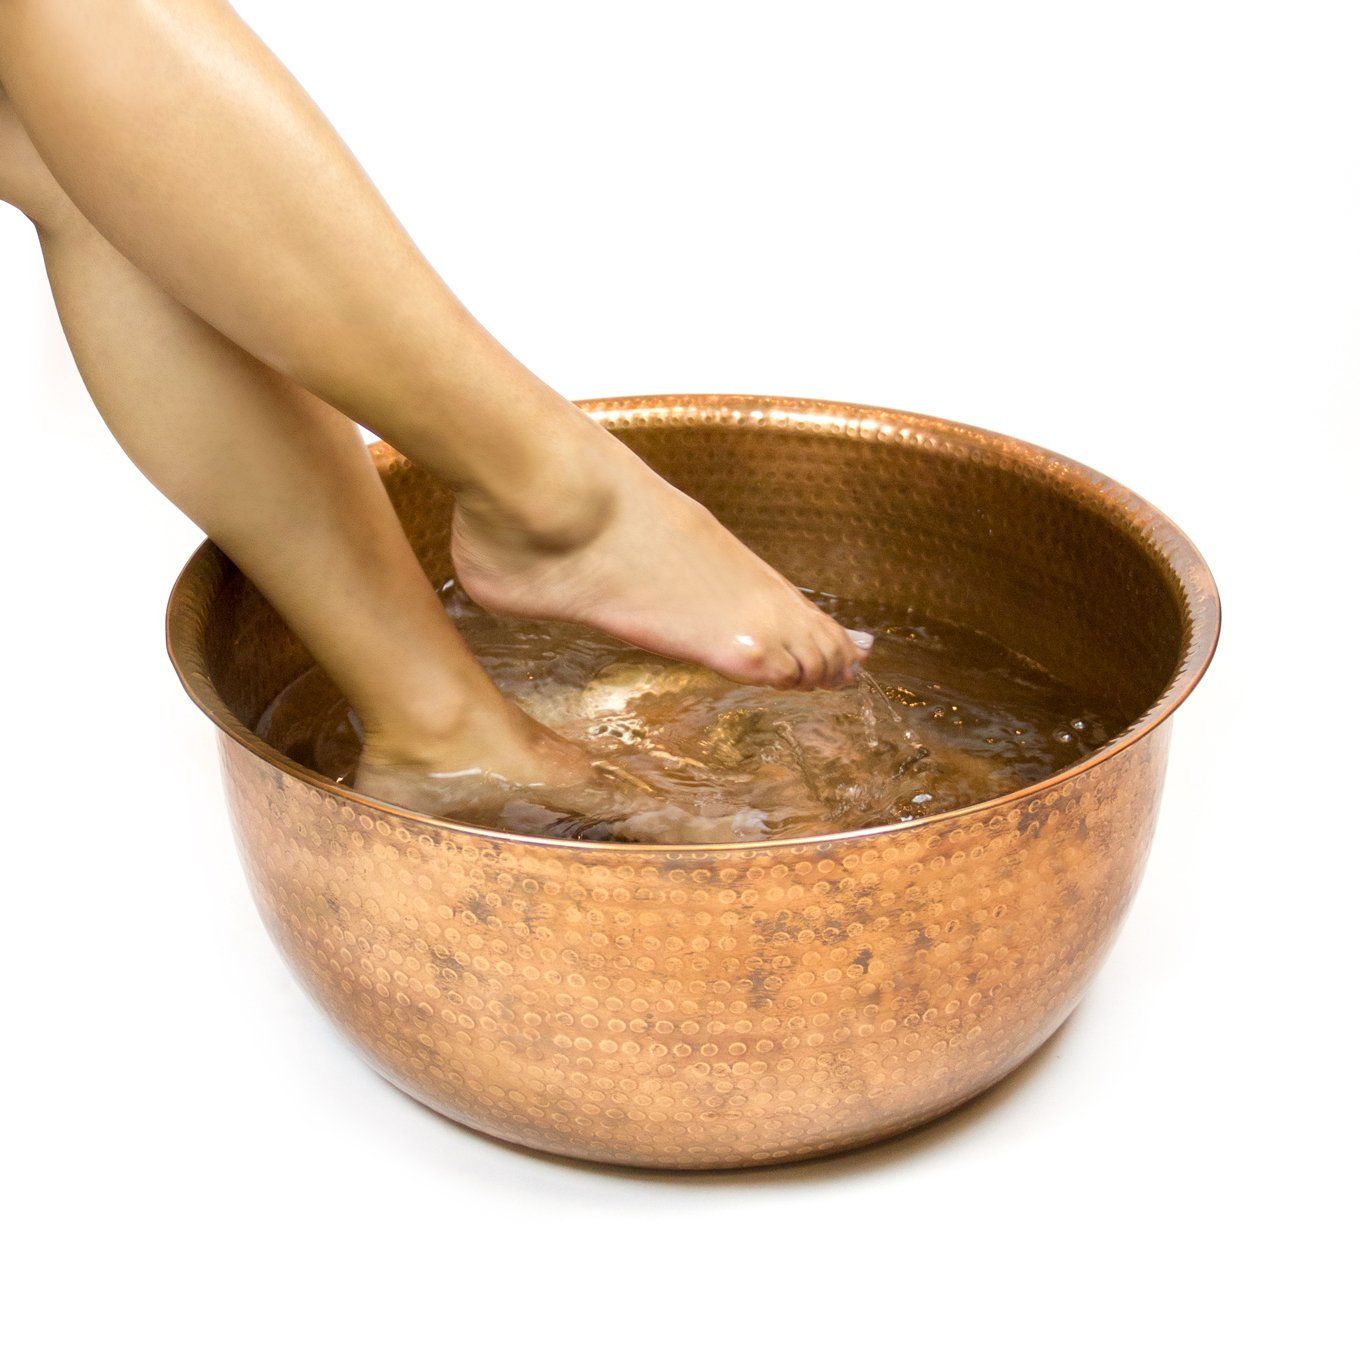 Not So Humble Pie: Chemistry & Beauty: Copper Bowls